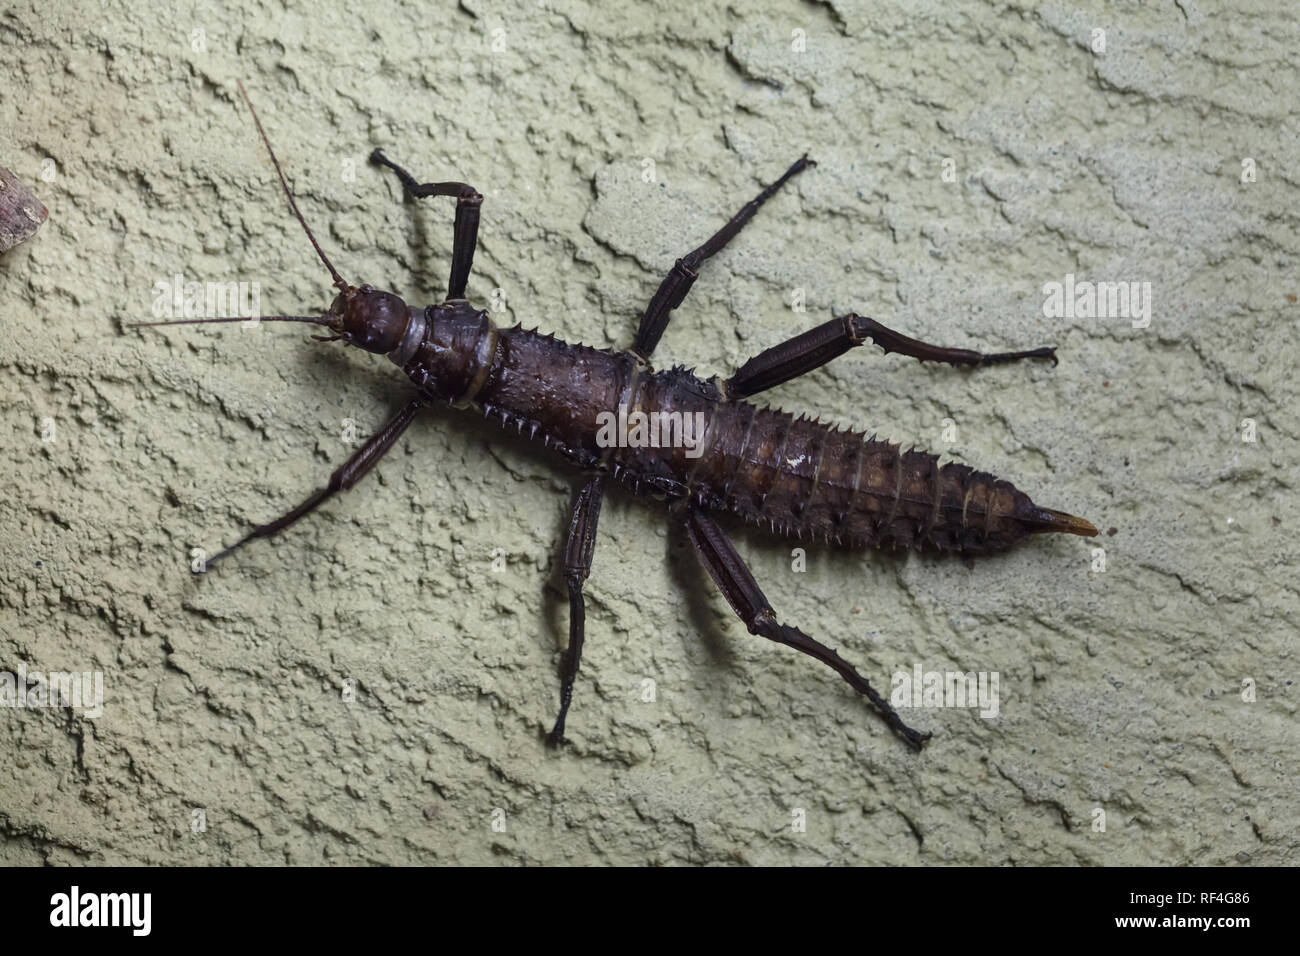 Thorny Devil Stick Insect (Eurycantha calcarata), auch bekannt als die Giant spiny Stick Insect. Stockfoto